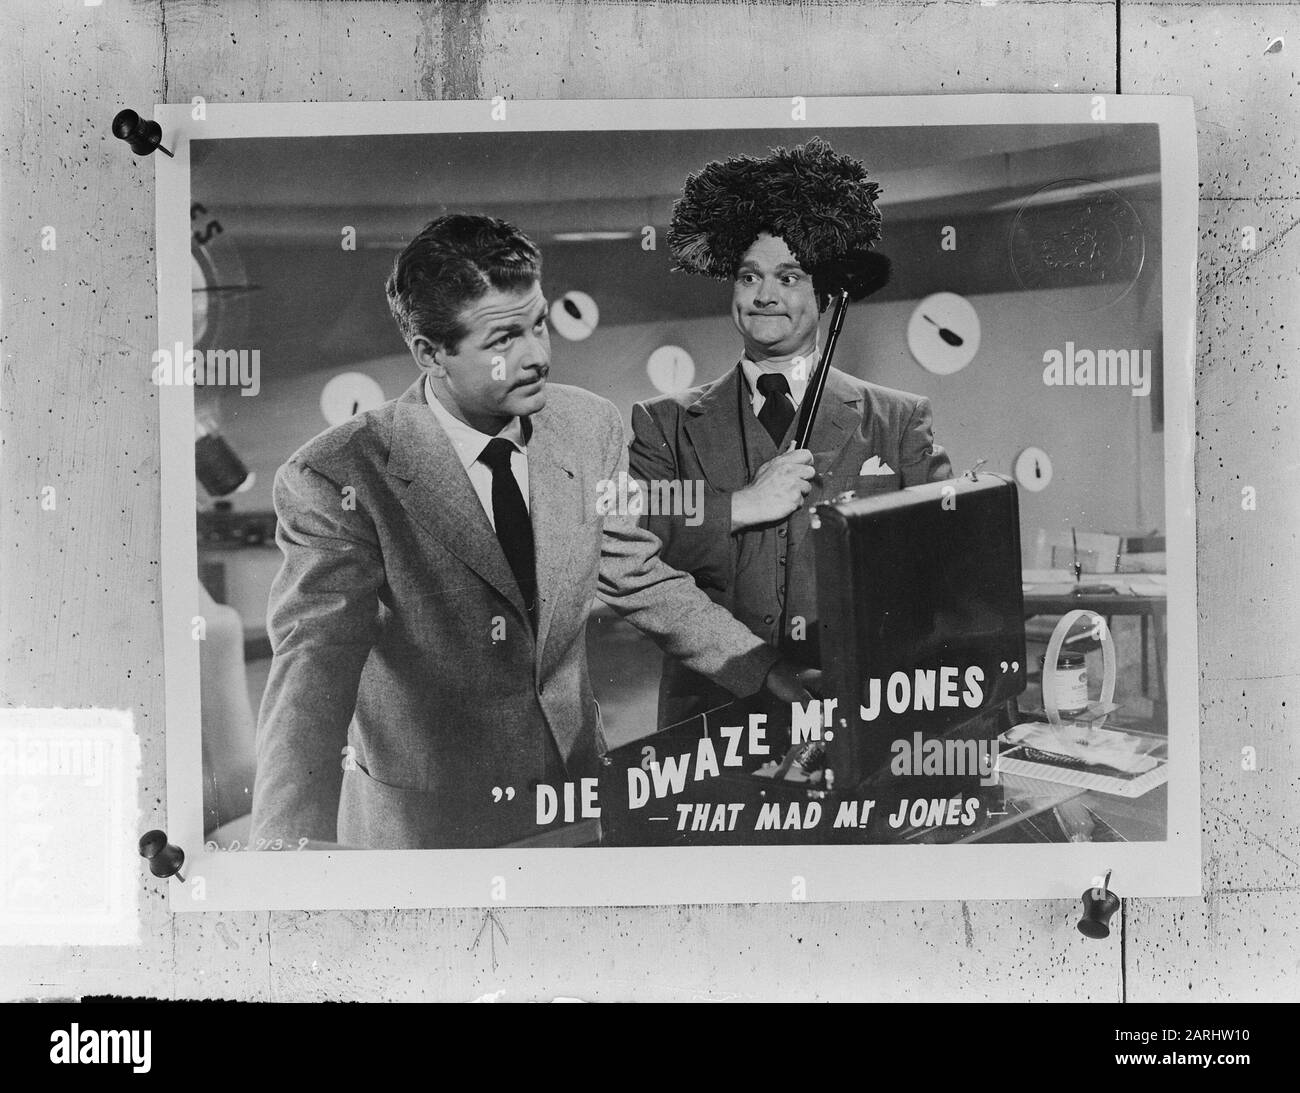 Film Repros Die Dwaze Mr. Jones Annotation: Subject the film The Fuller Brush Man. Other title was That Mad mr. Jones, starring American comedian Red Skelton (right) Date: July 26, 1949 Keywords: films, movie stars Person name: Skelton, Red Stock Photo